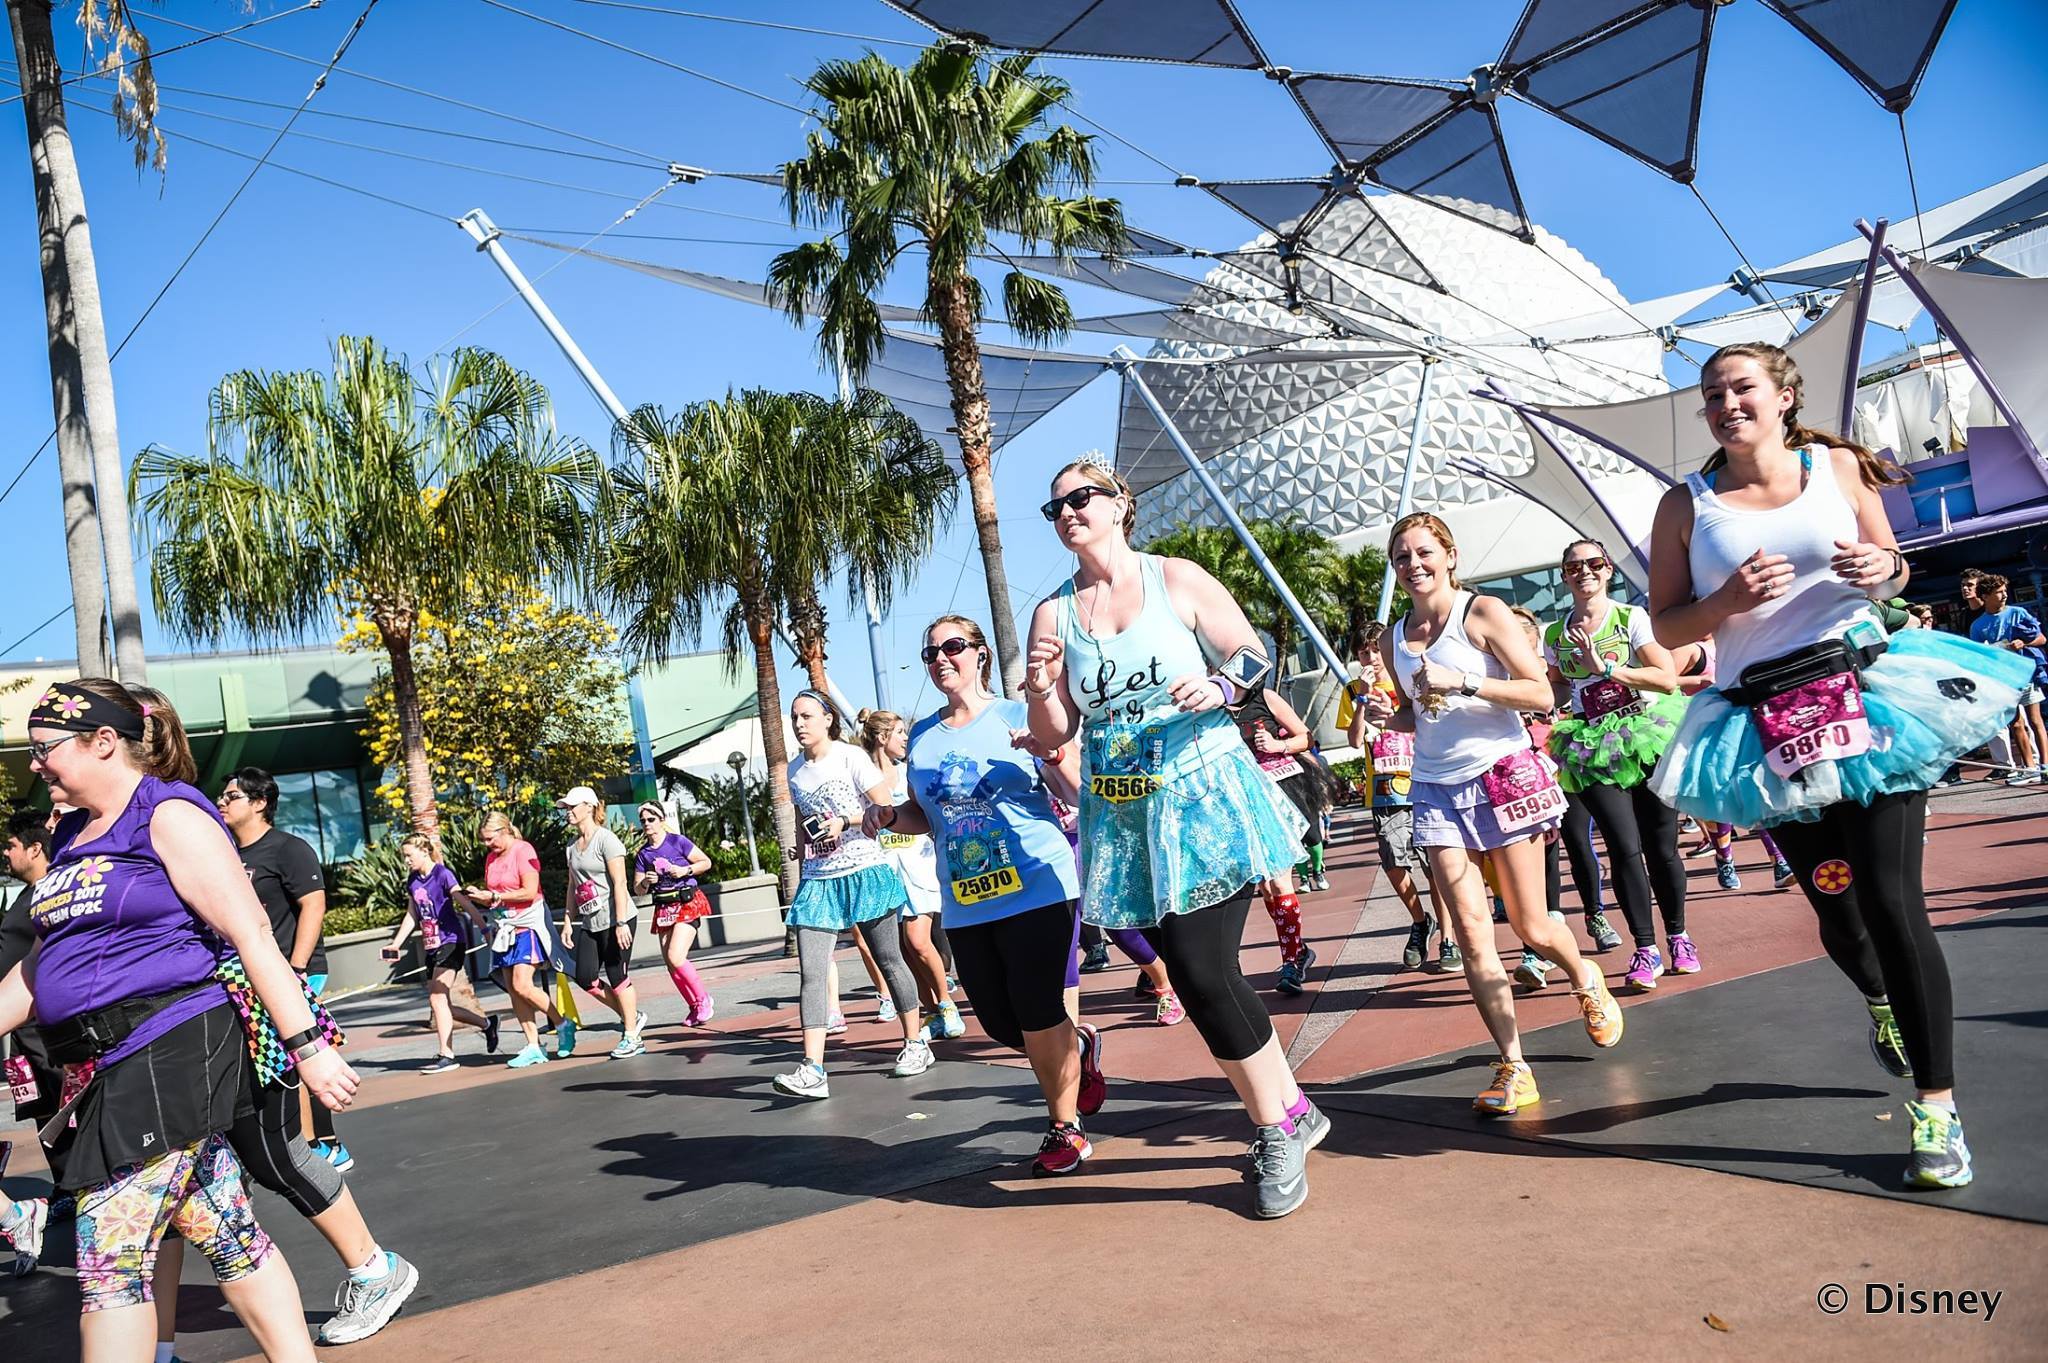 The runDisney Community Comes From All Walks Of Life